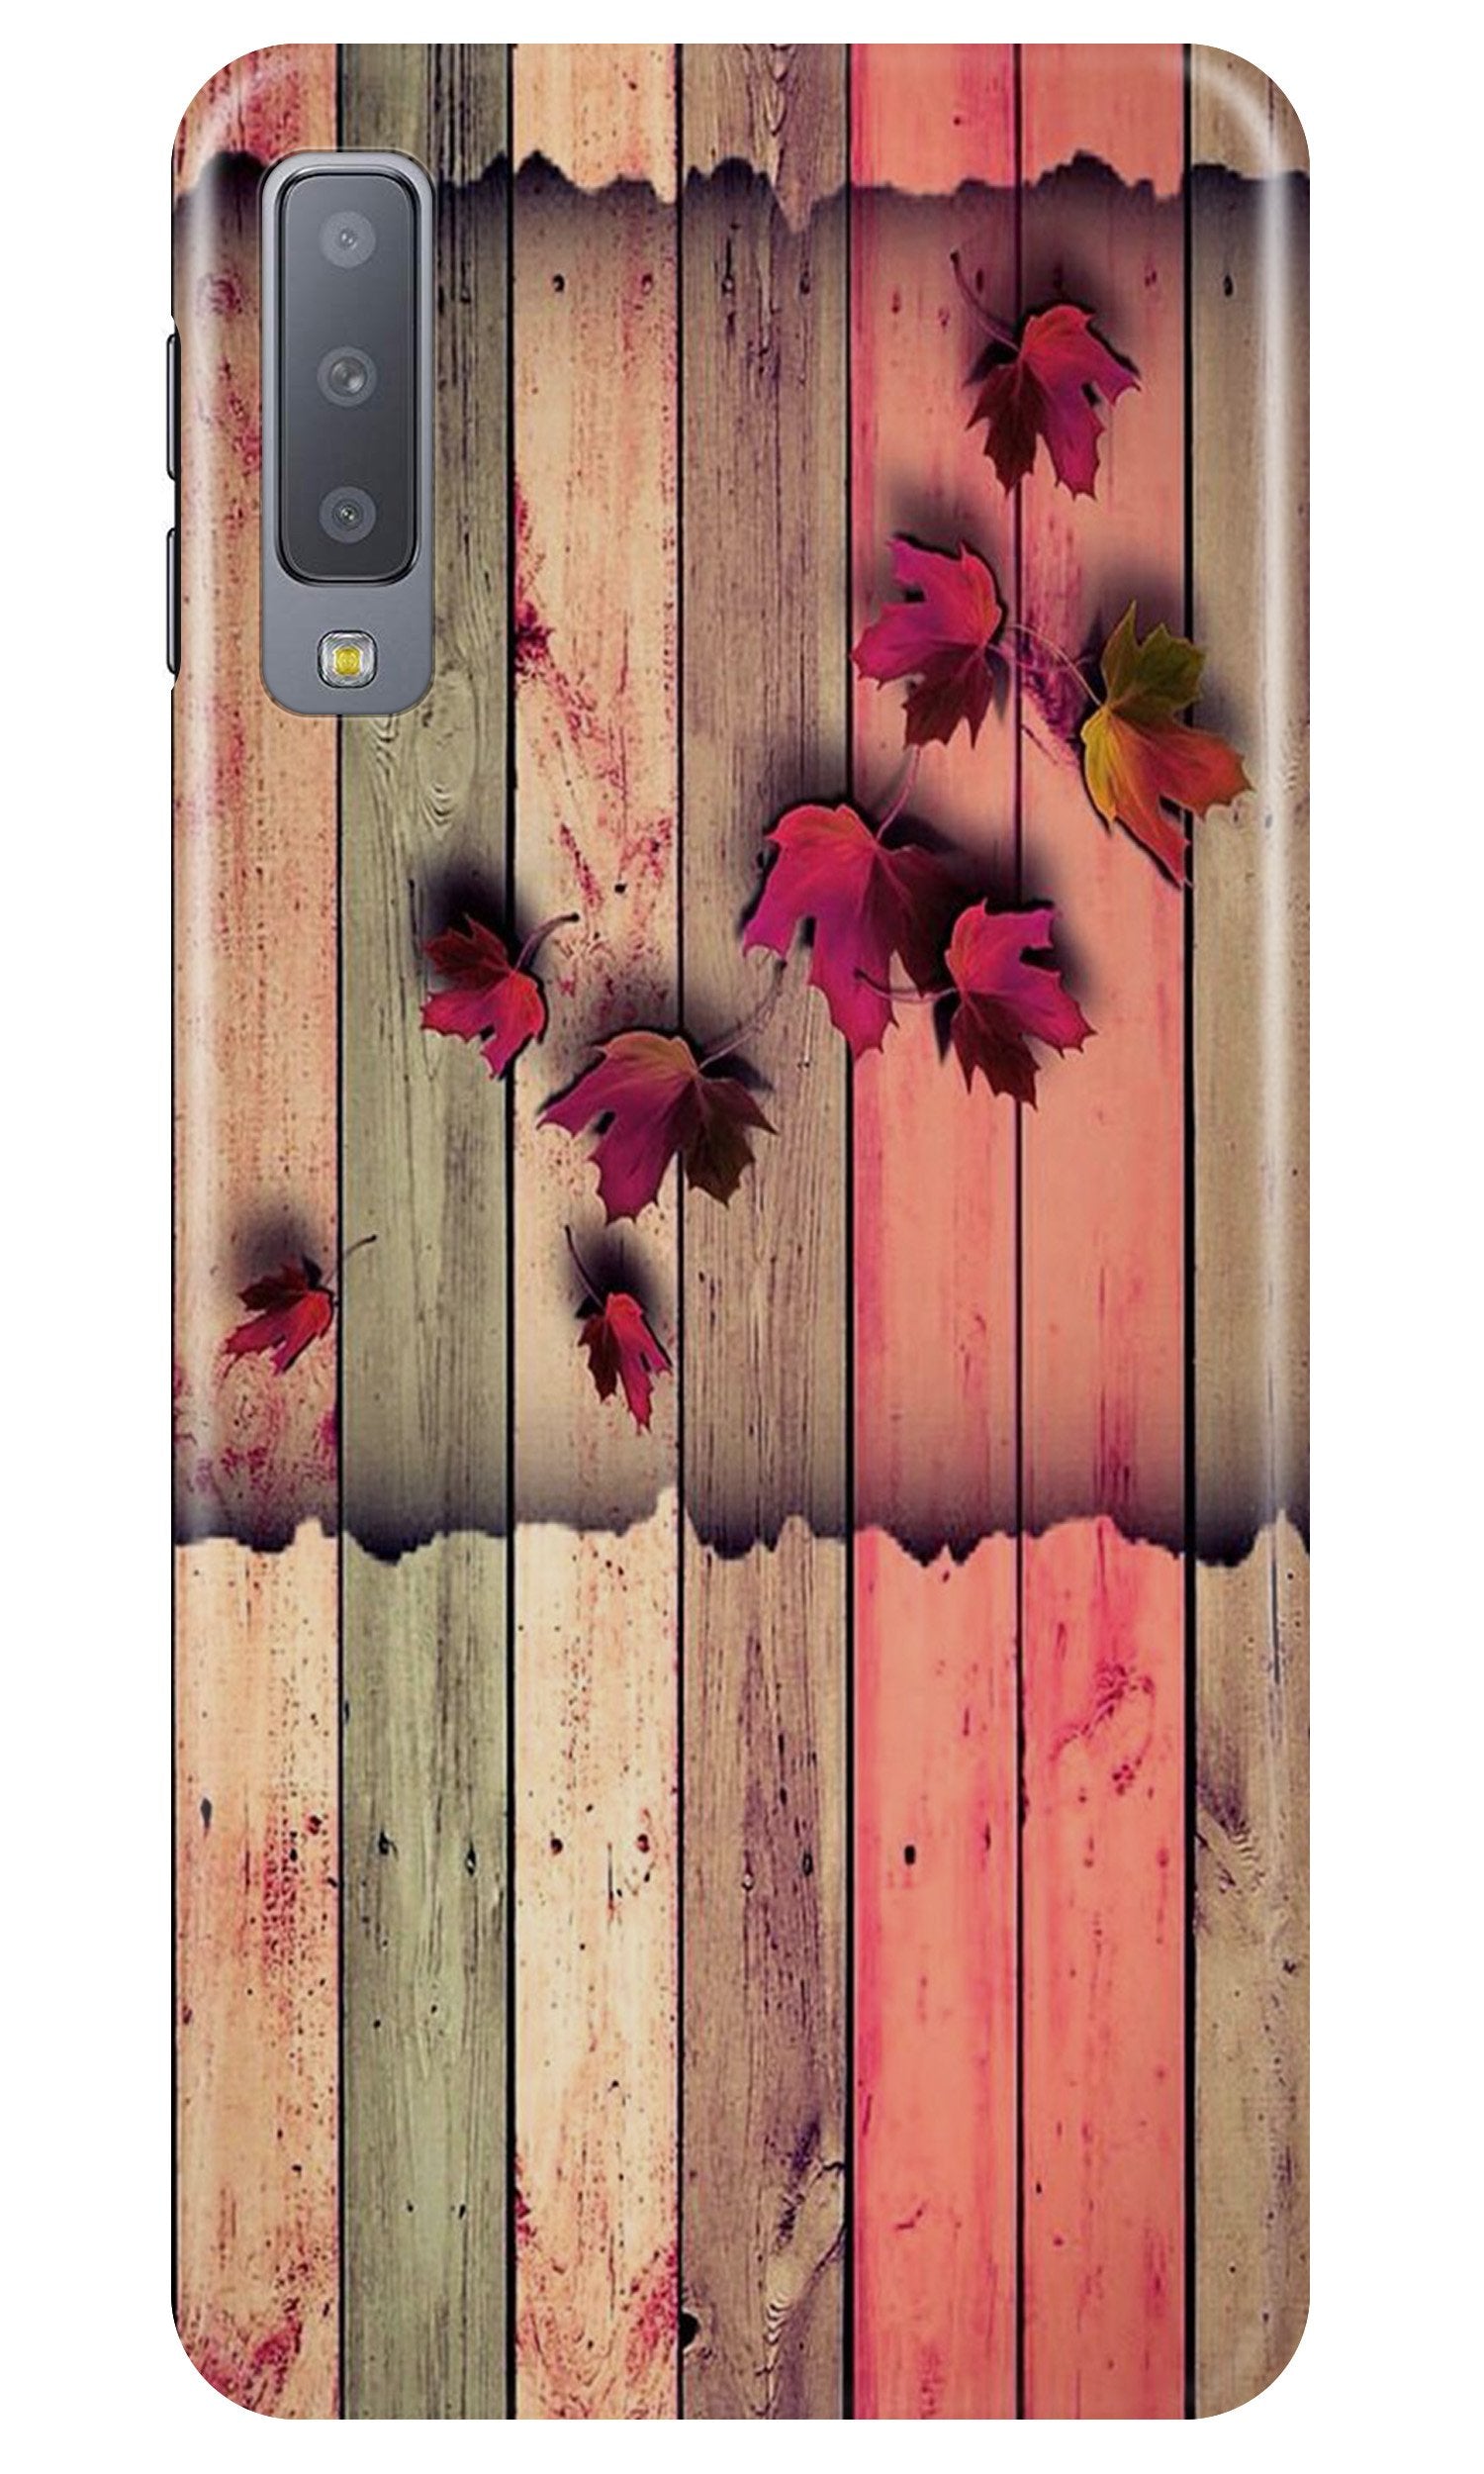 Wooden look2 Case for Samung Galaxy A70s